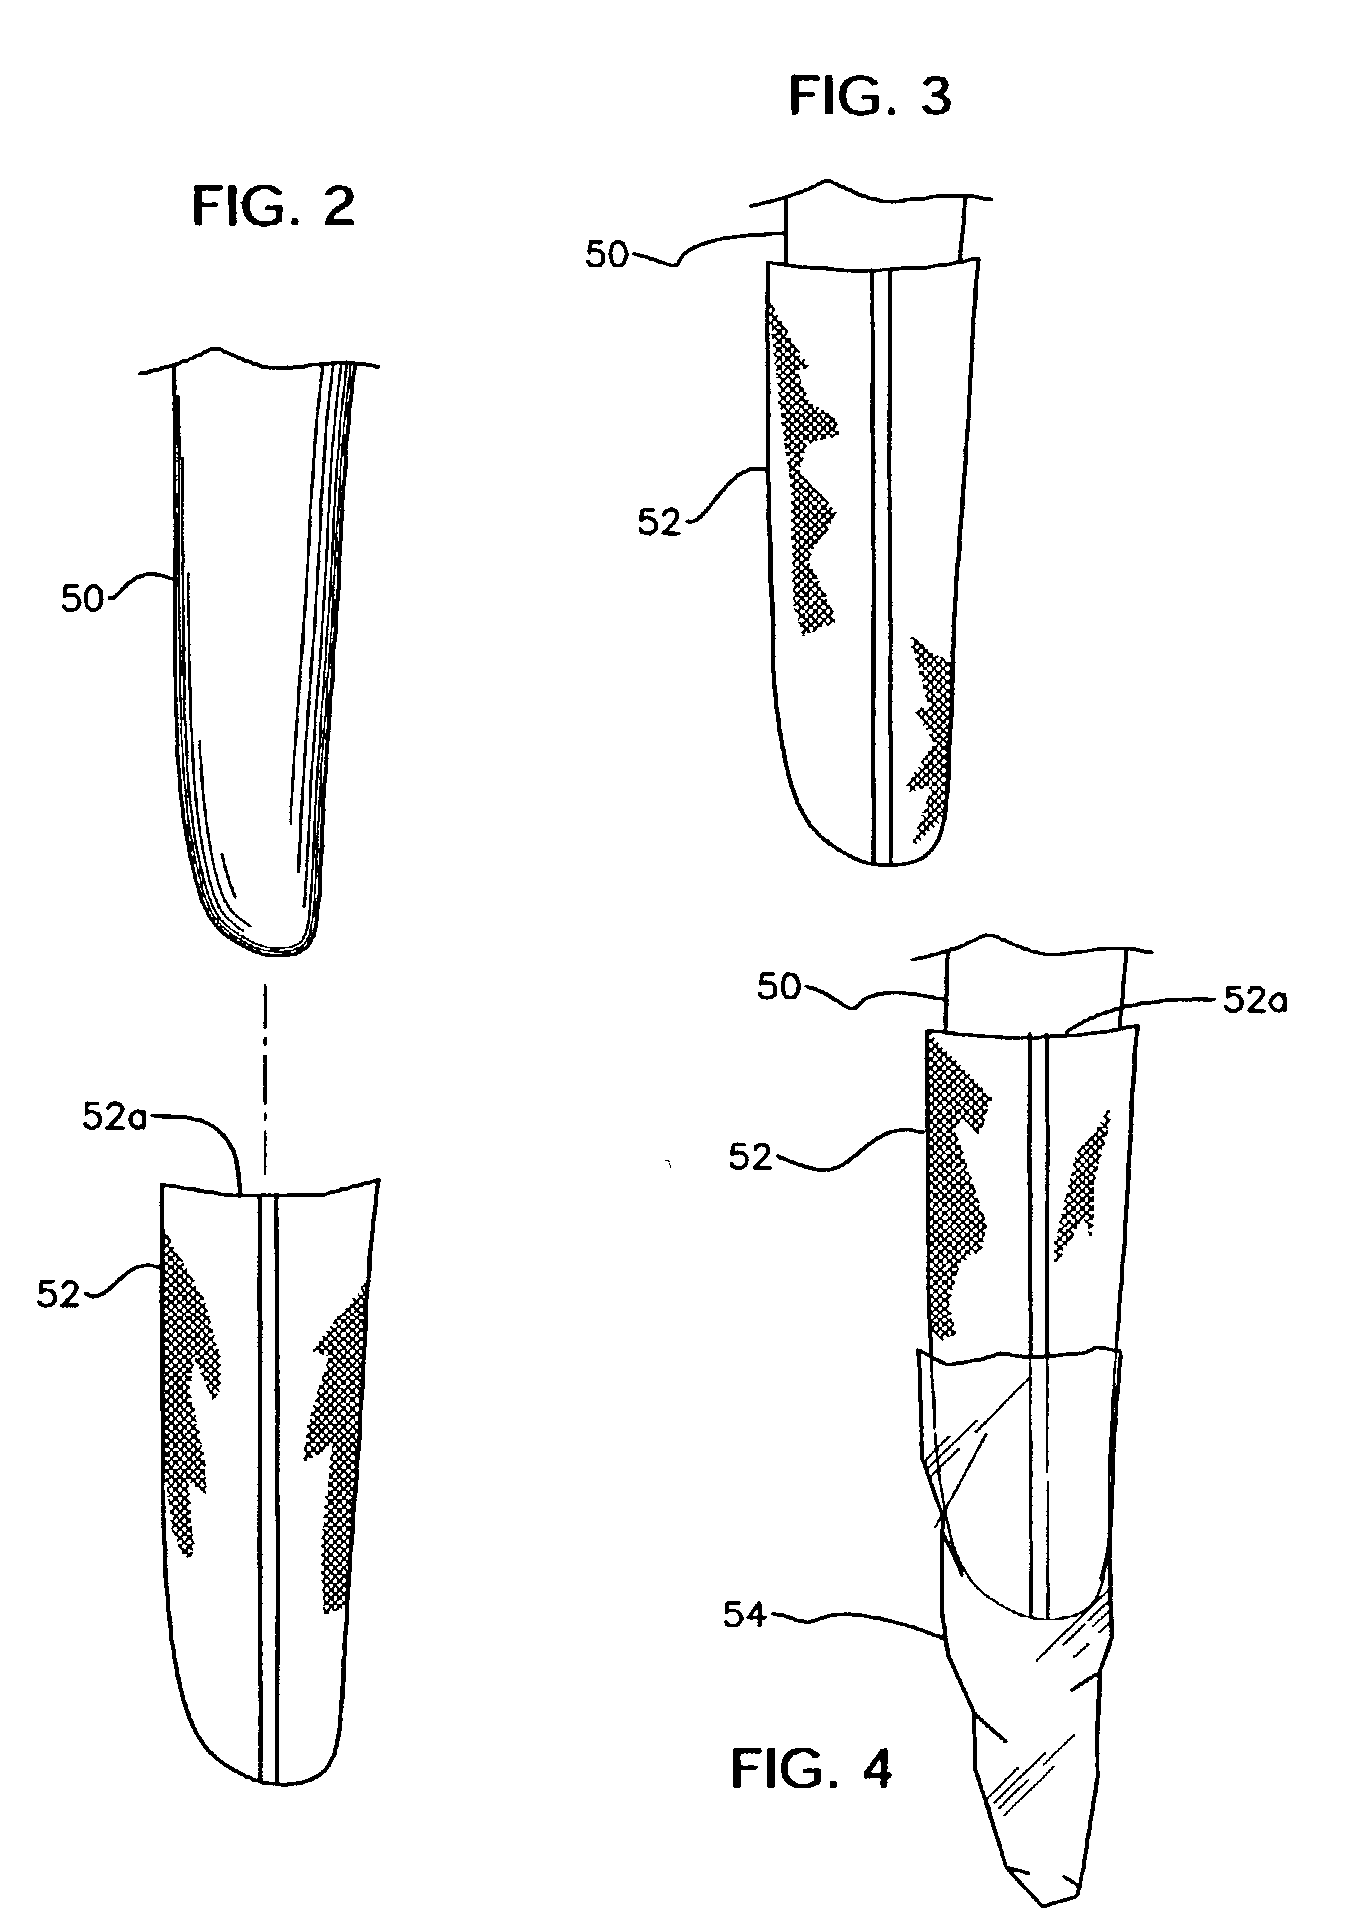 Apparatus for casting a prosthetic socket under vacuum